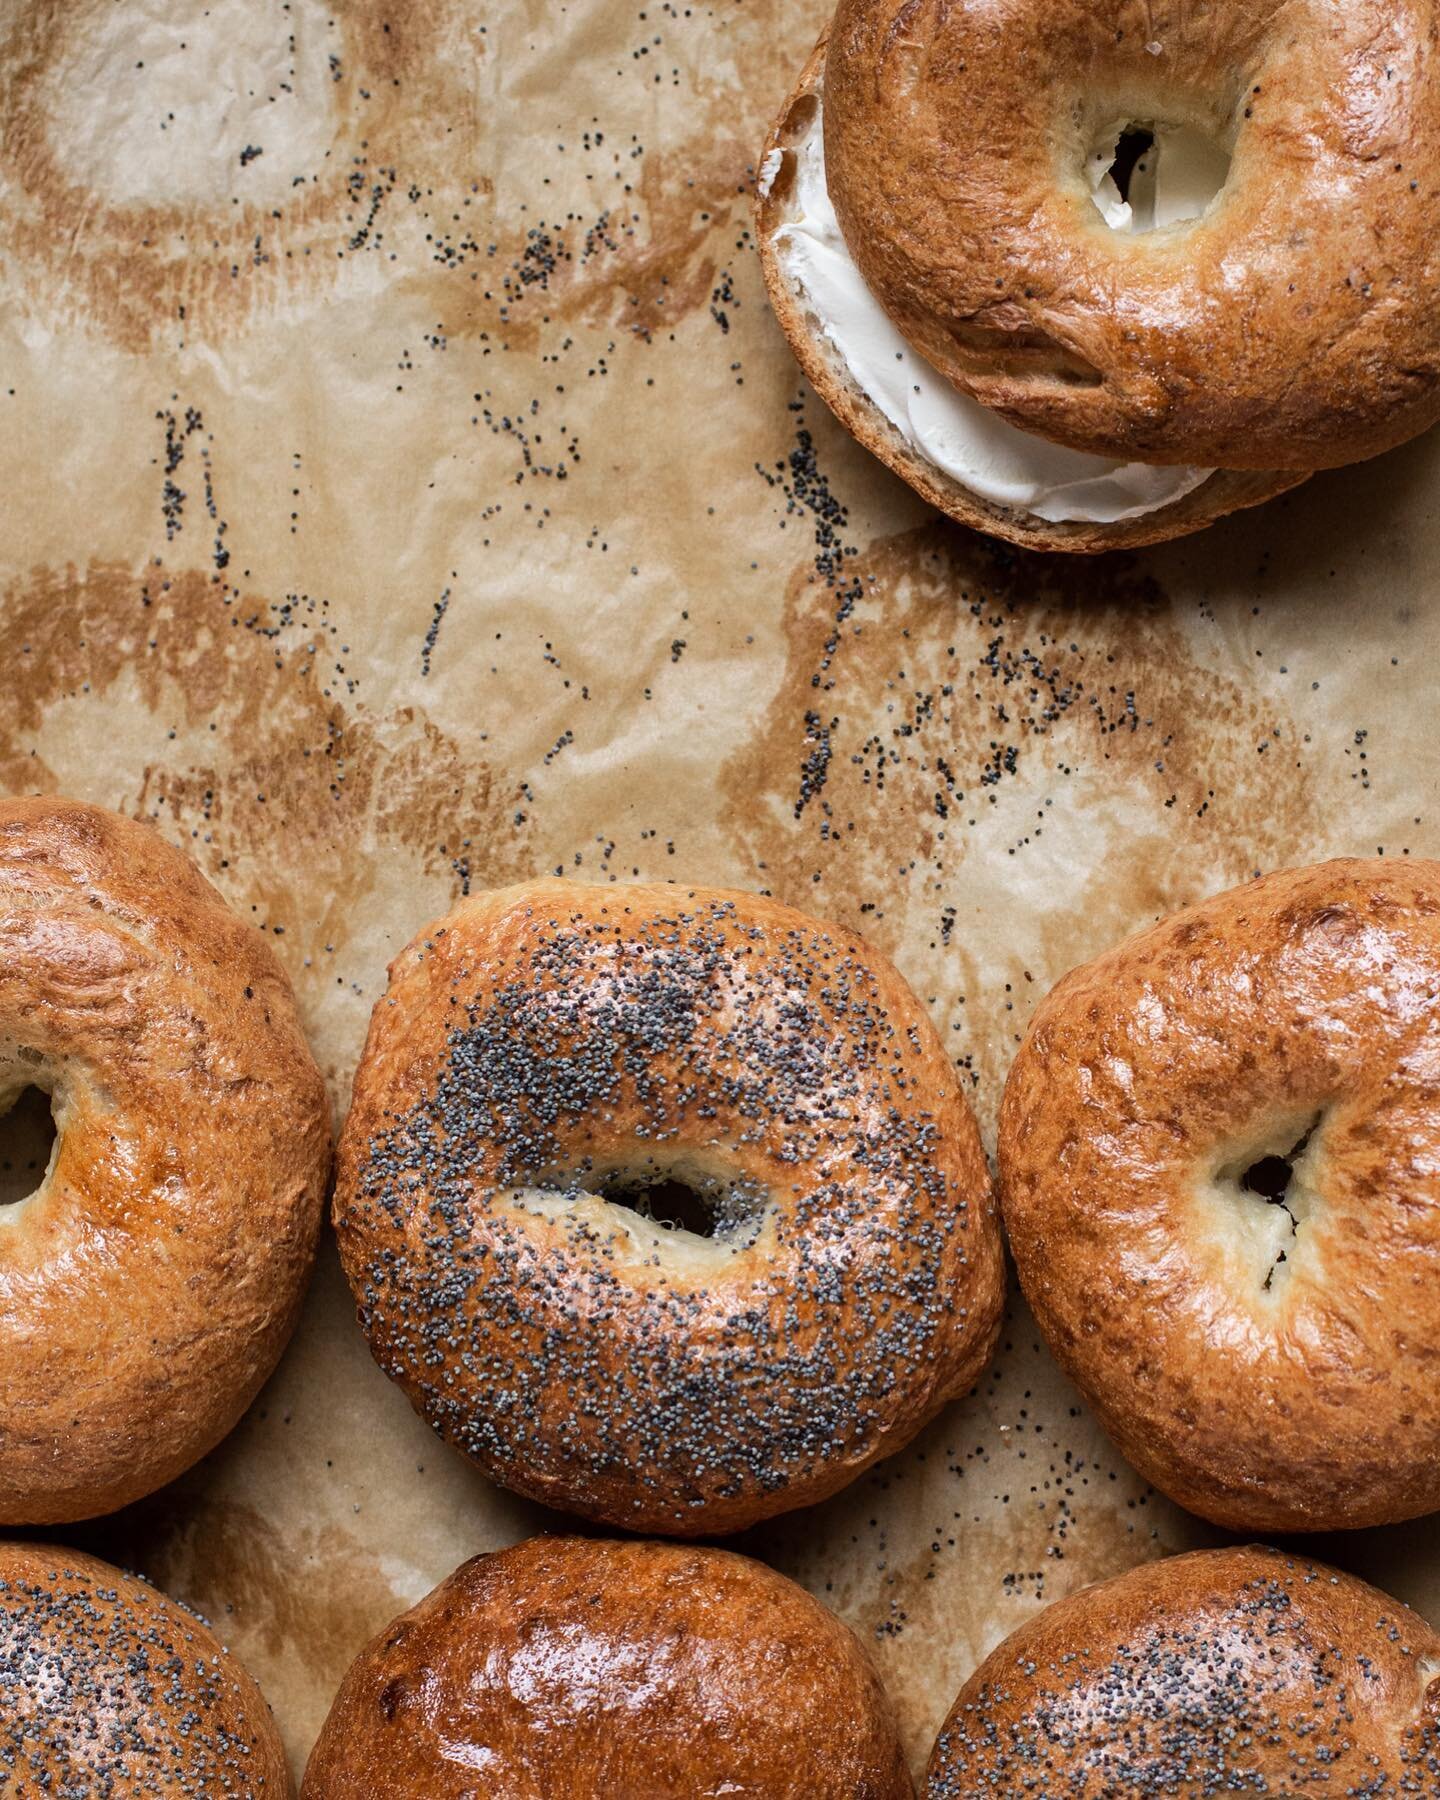 Made bagels today from The Bread Bible🥯 There are a few steps but it&rsquo;s not difficult. After the overnight rise, the dough is pillowy-soft and easy to work with. 

foodphotographer#foodstyling #seattlefoodphotographer #bainbridgeislandfoodphoto